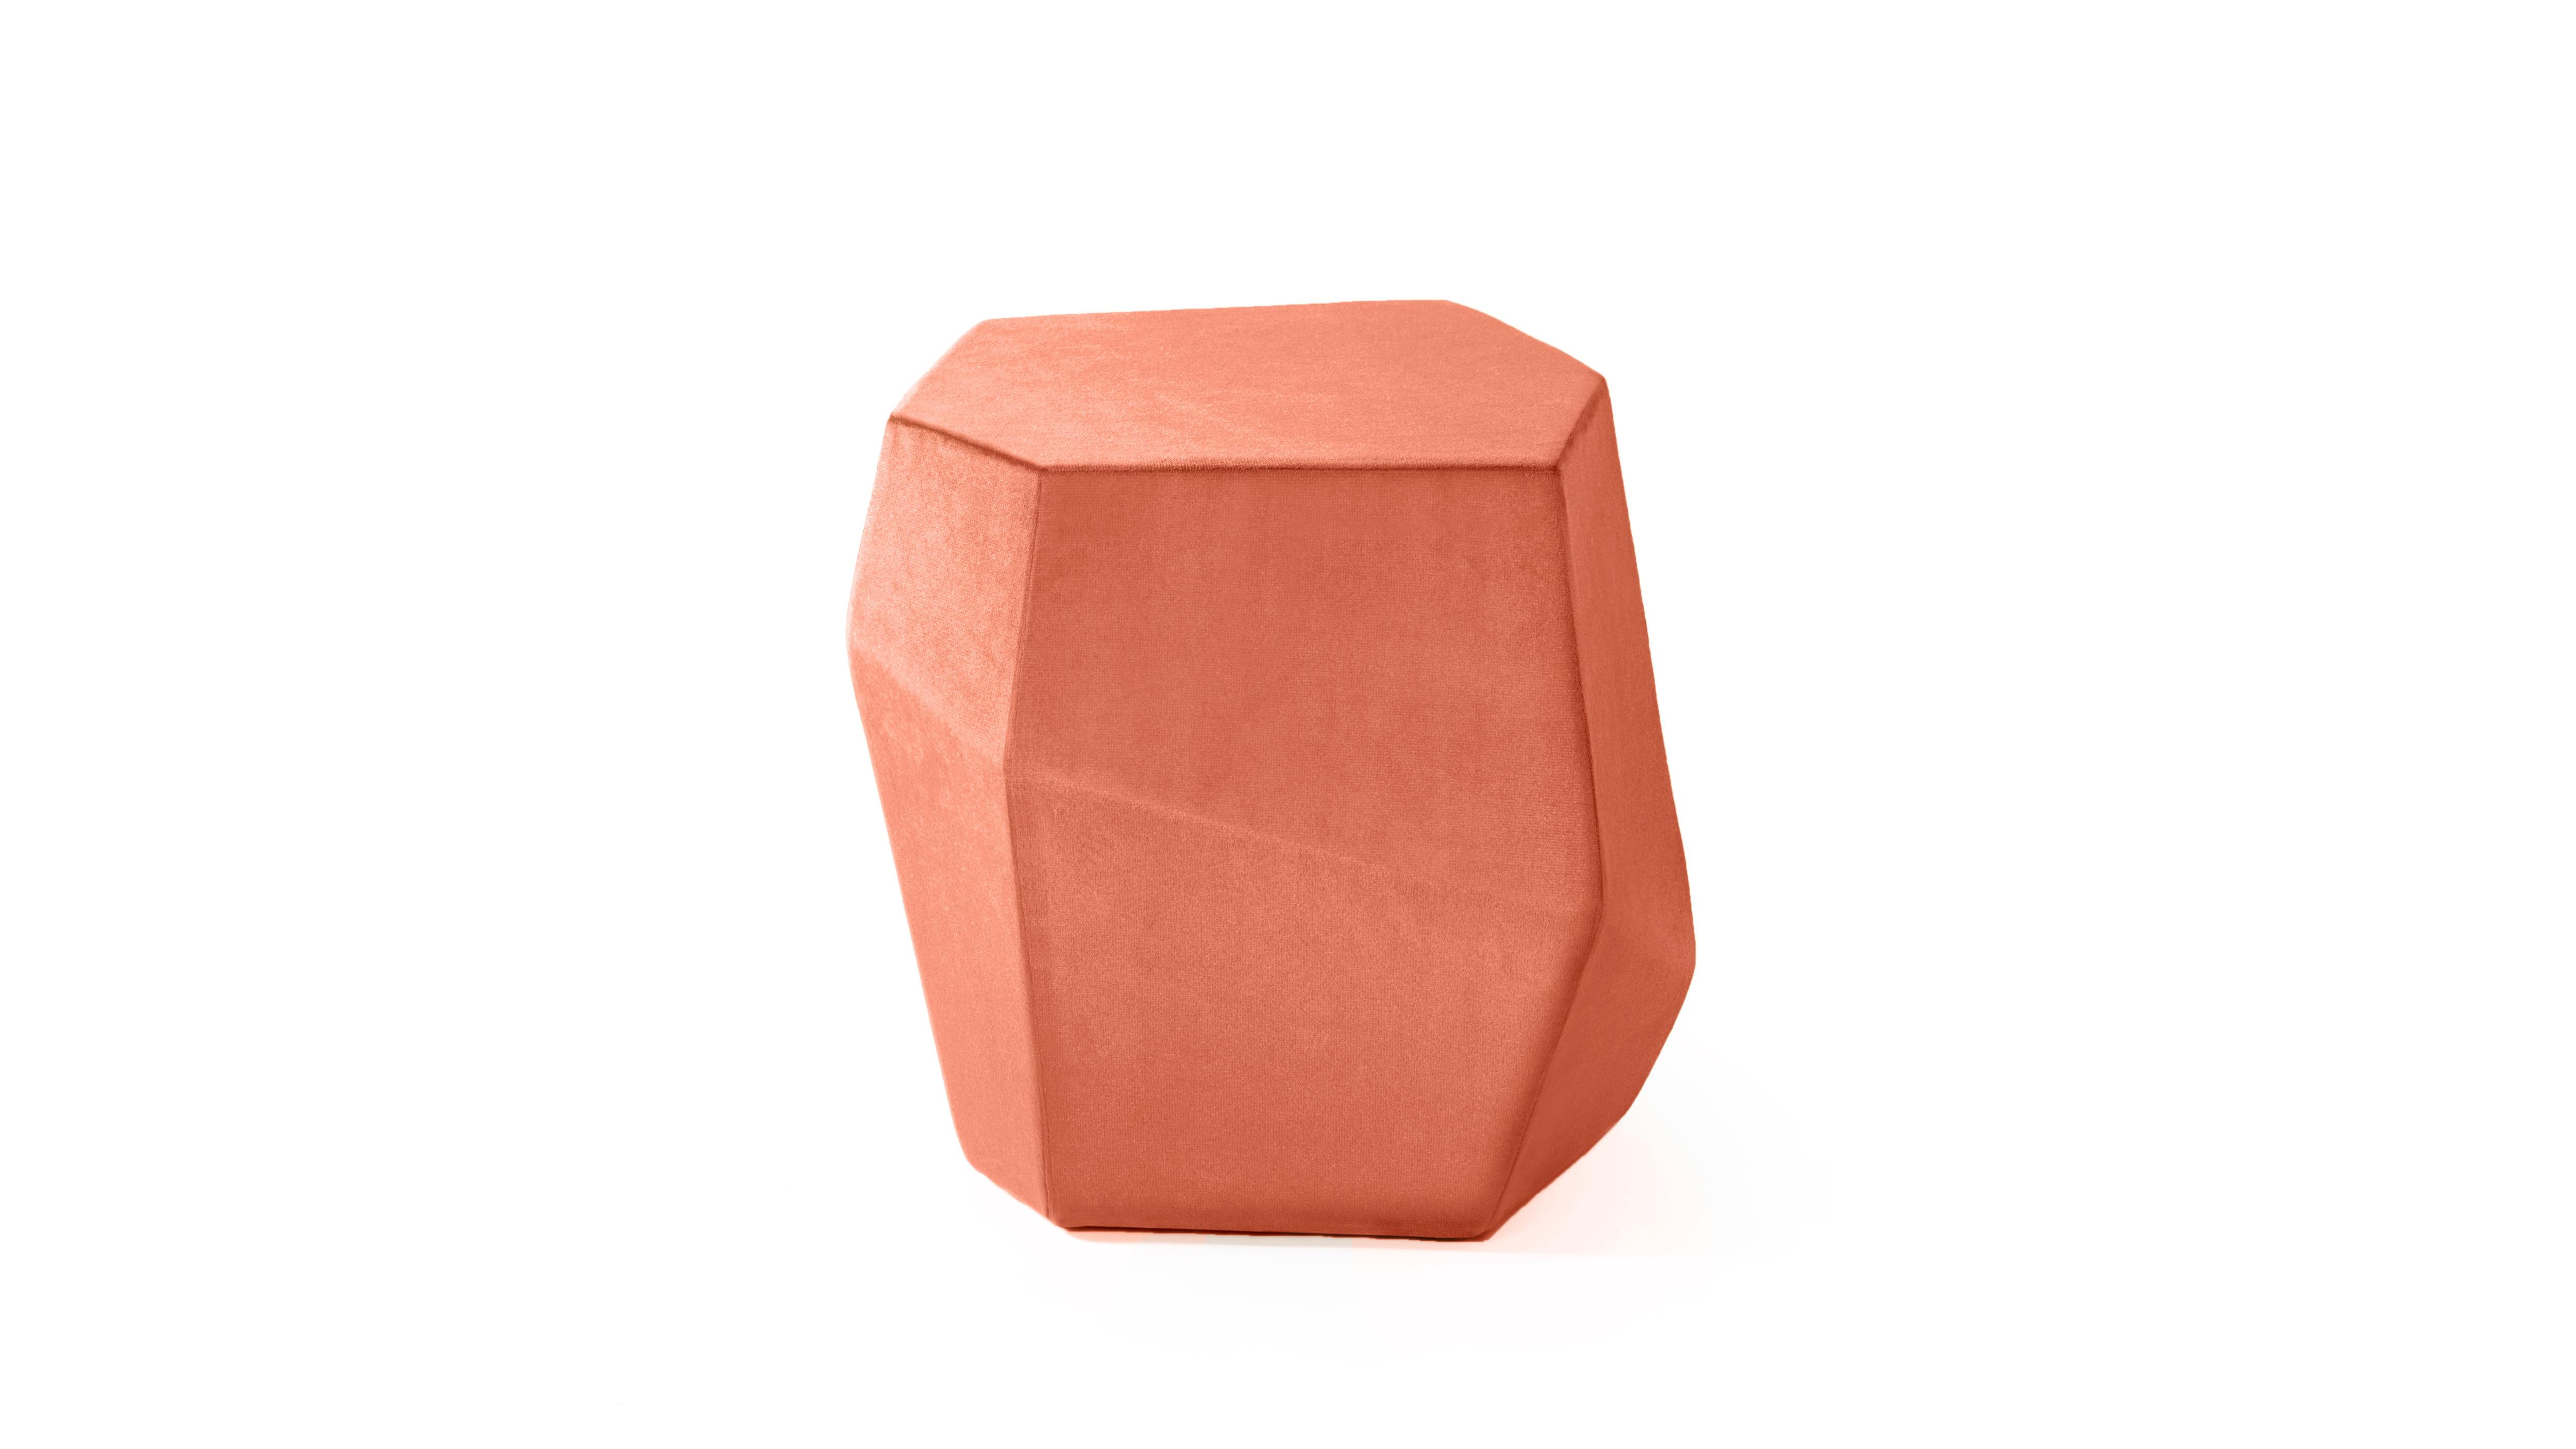 Rock Stool by InsidherLand
Dimensions: D 42 x W 53 x H 50 cm.
Materials: InsidherLand Bright Velvet Ref. Pink fabric.
7 kg.
Available in different fabrics.

Rock is a stool with the same form of the smaller table of the Three Rocks set. The